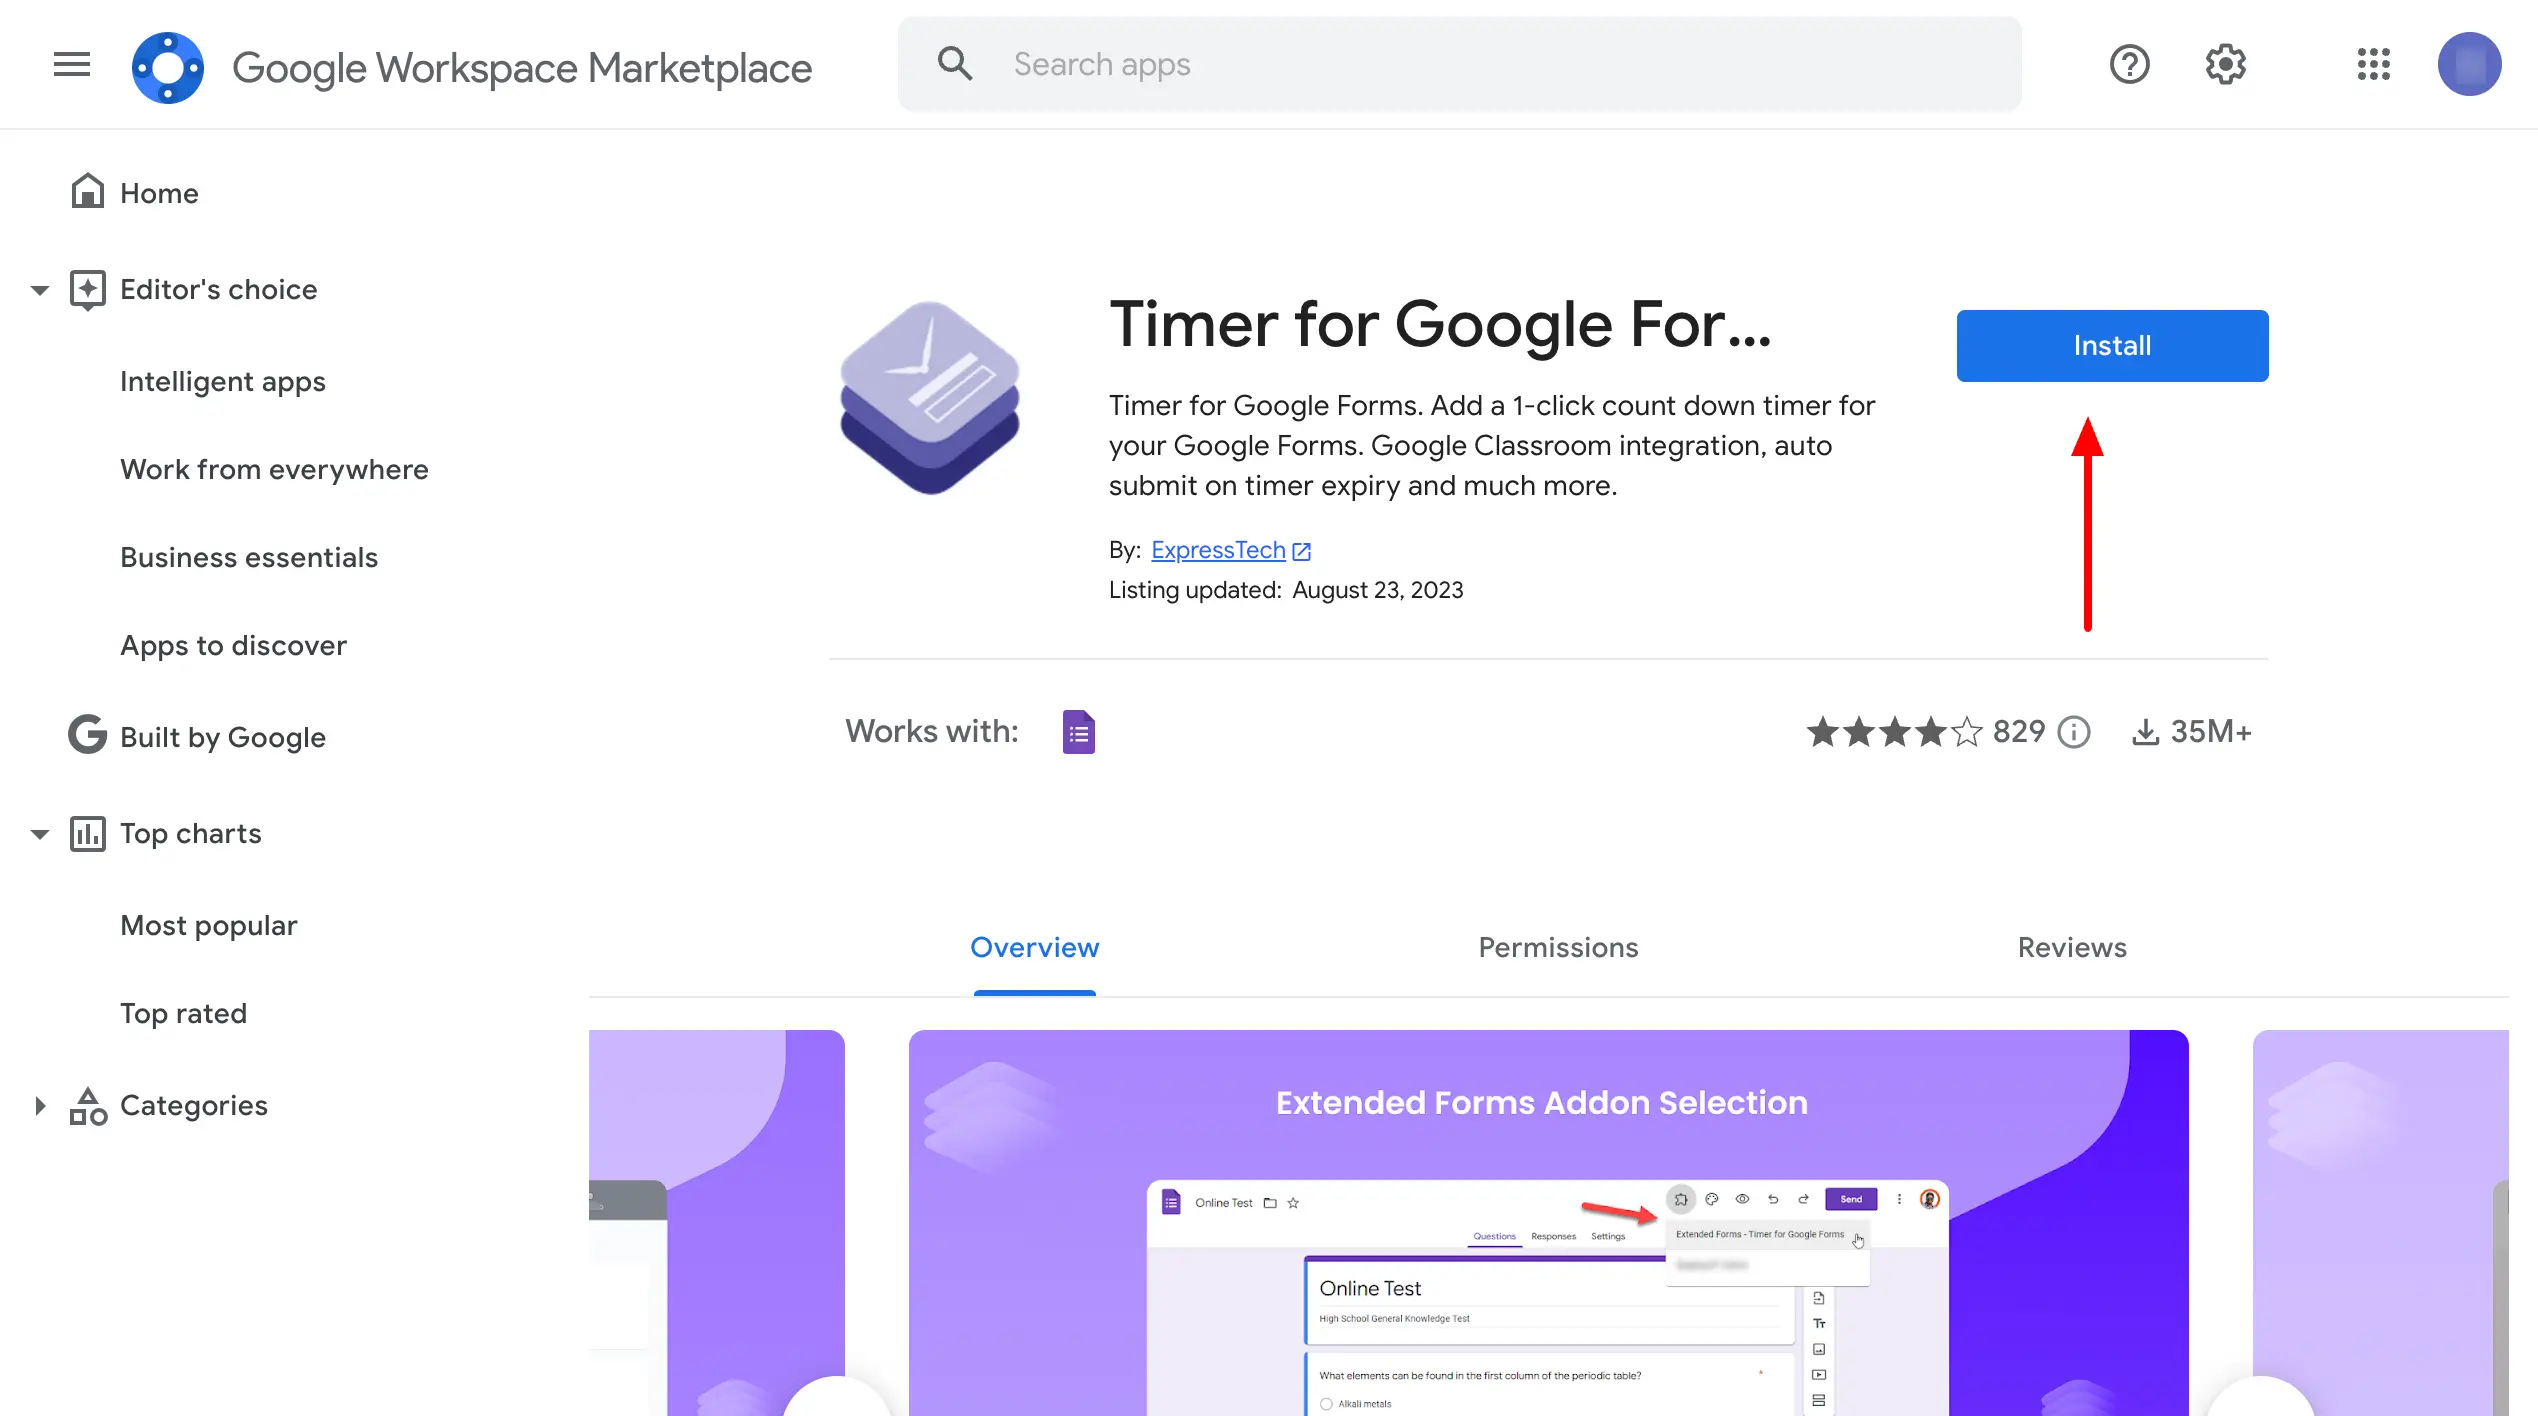 Extended Forms-Google Workspace Marketplace